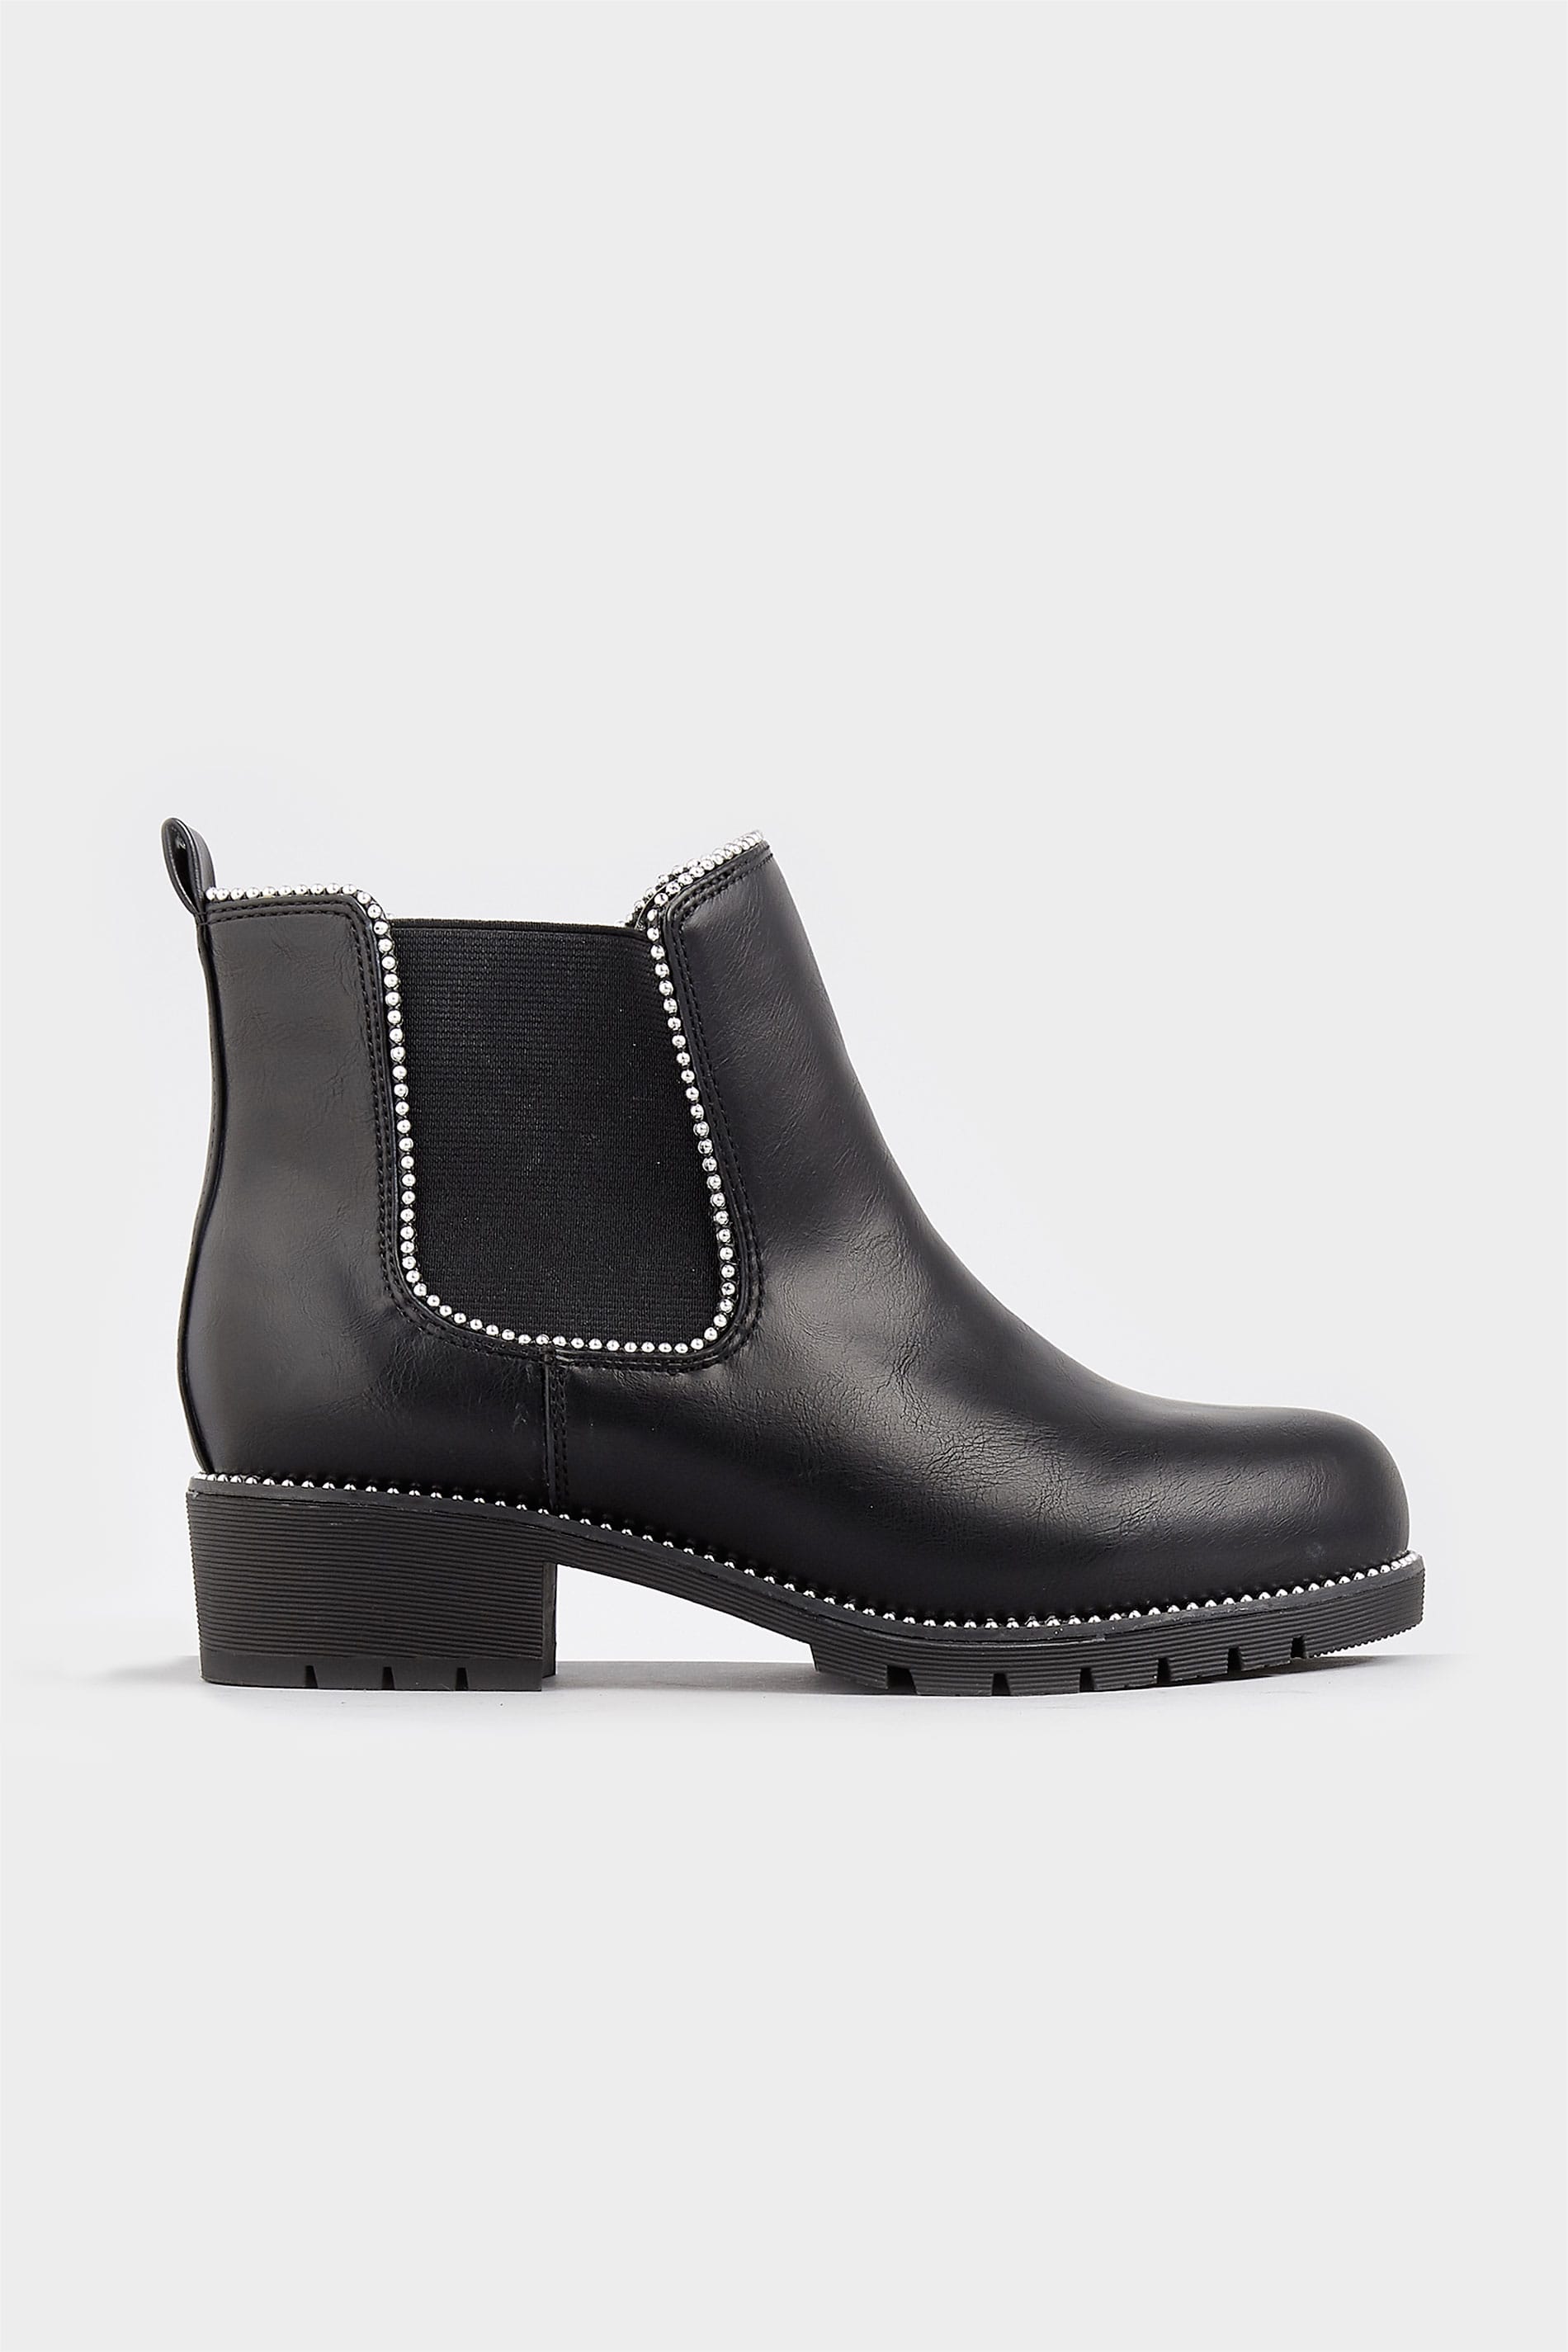 Black Studded Chelsea Boots In Extra 